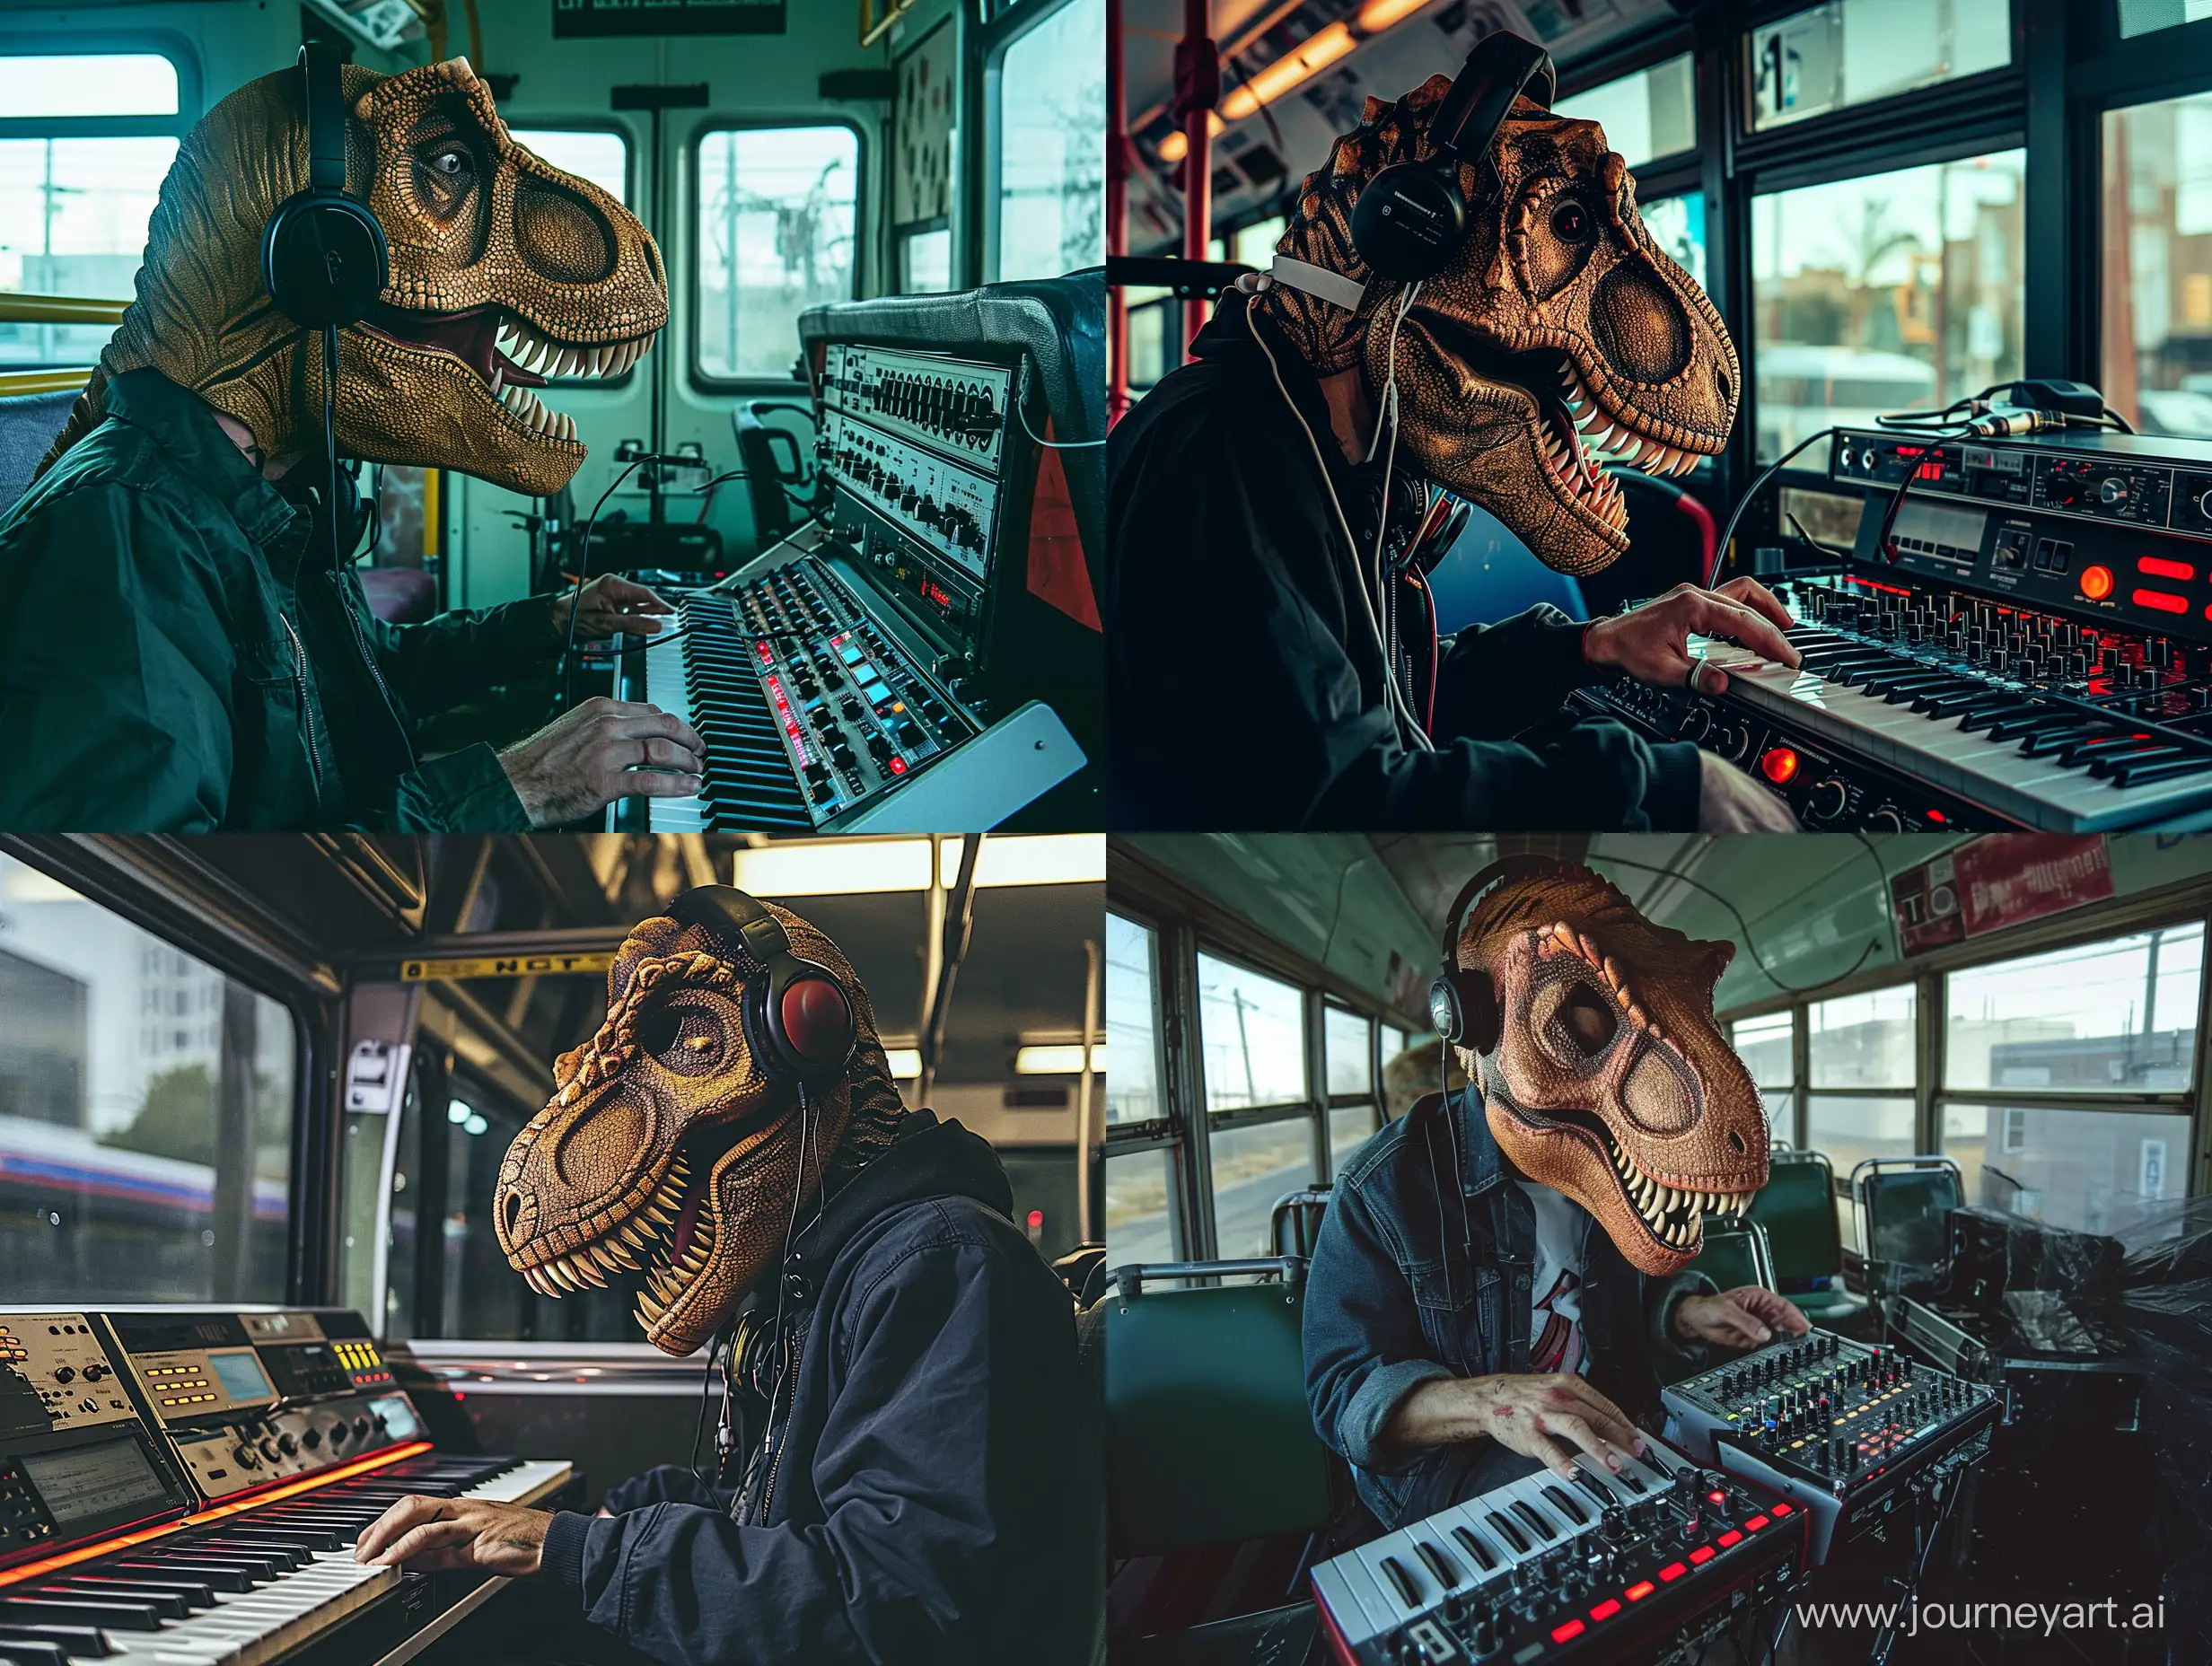 T-Rex mask man with human proportion body, headphones operating an Akai beat machine in a bus, gritty urban vibe inspire 90s detroit 8 Mile wide shot, Moviecam Compact Camera, Moviecam Superlight Camera and Zeiss Ultra Prime Lenses, Kurtis Hanson shot, dramatic and moody lighting, street photography style, man is in front perspective, 